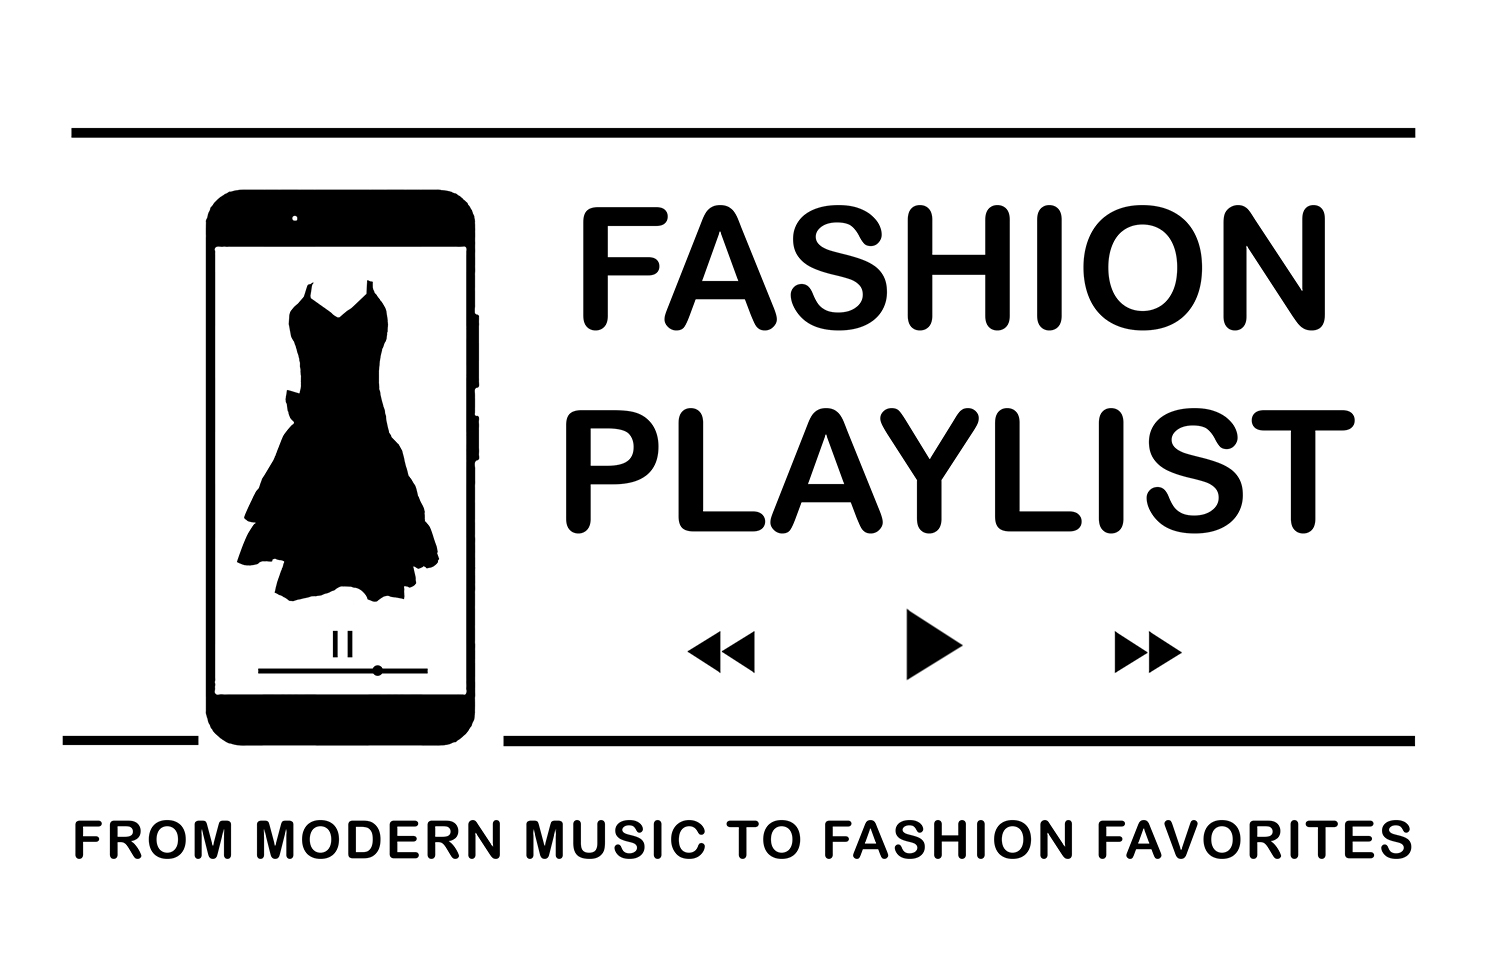 Black and white image of a dress silhouette set inside a cell phone silhouette next to the words Fashion Playlist